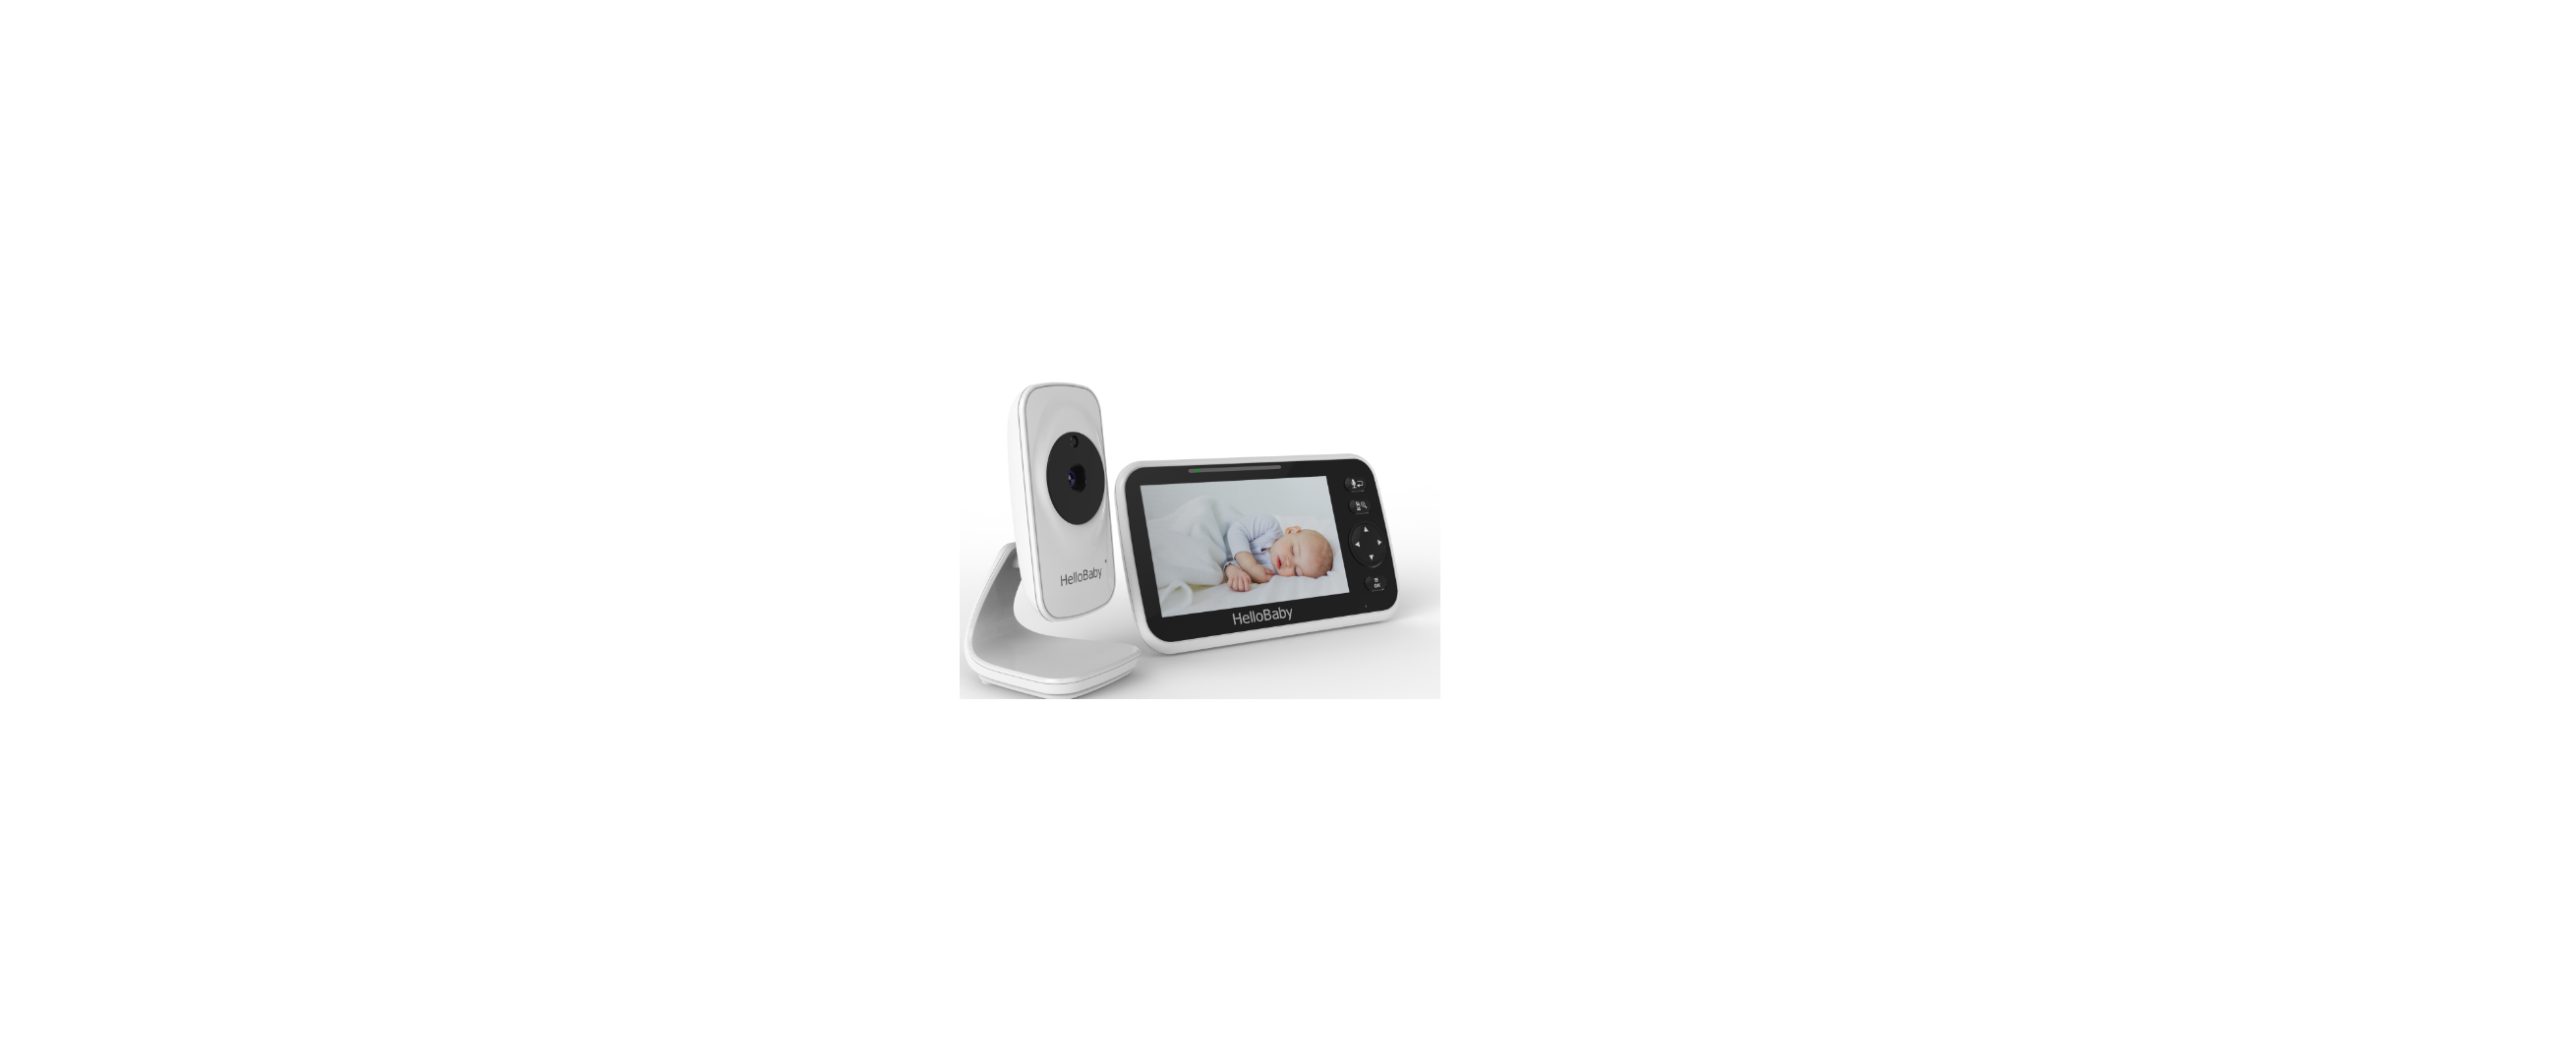 HelloBaby Monitor HB24 | Wireless Video Baby Monitor with Camera